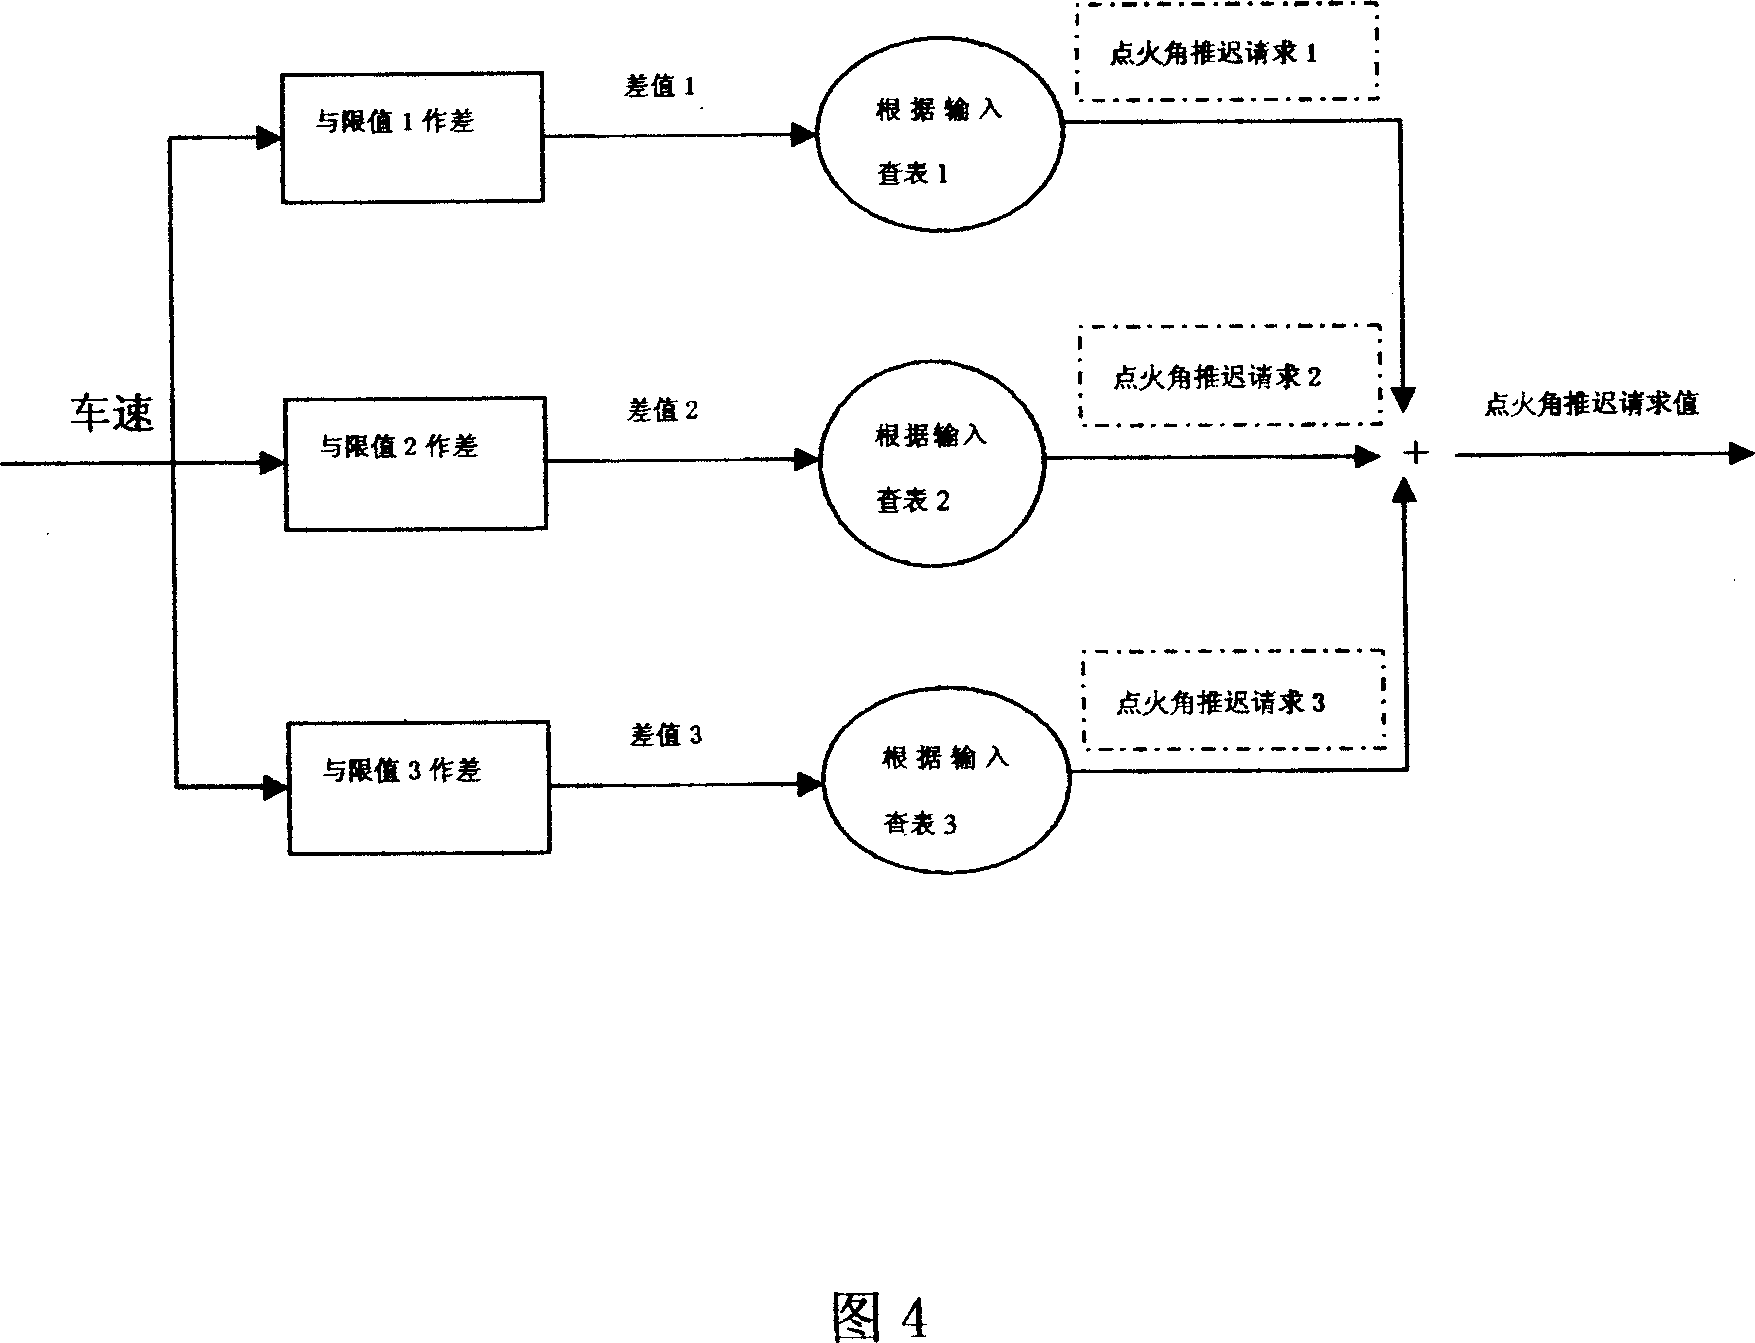 Method for limiting speed of electrojet low-speed vehicle